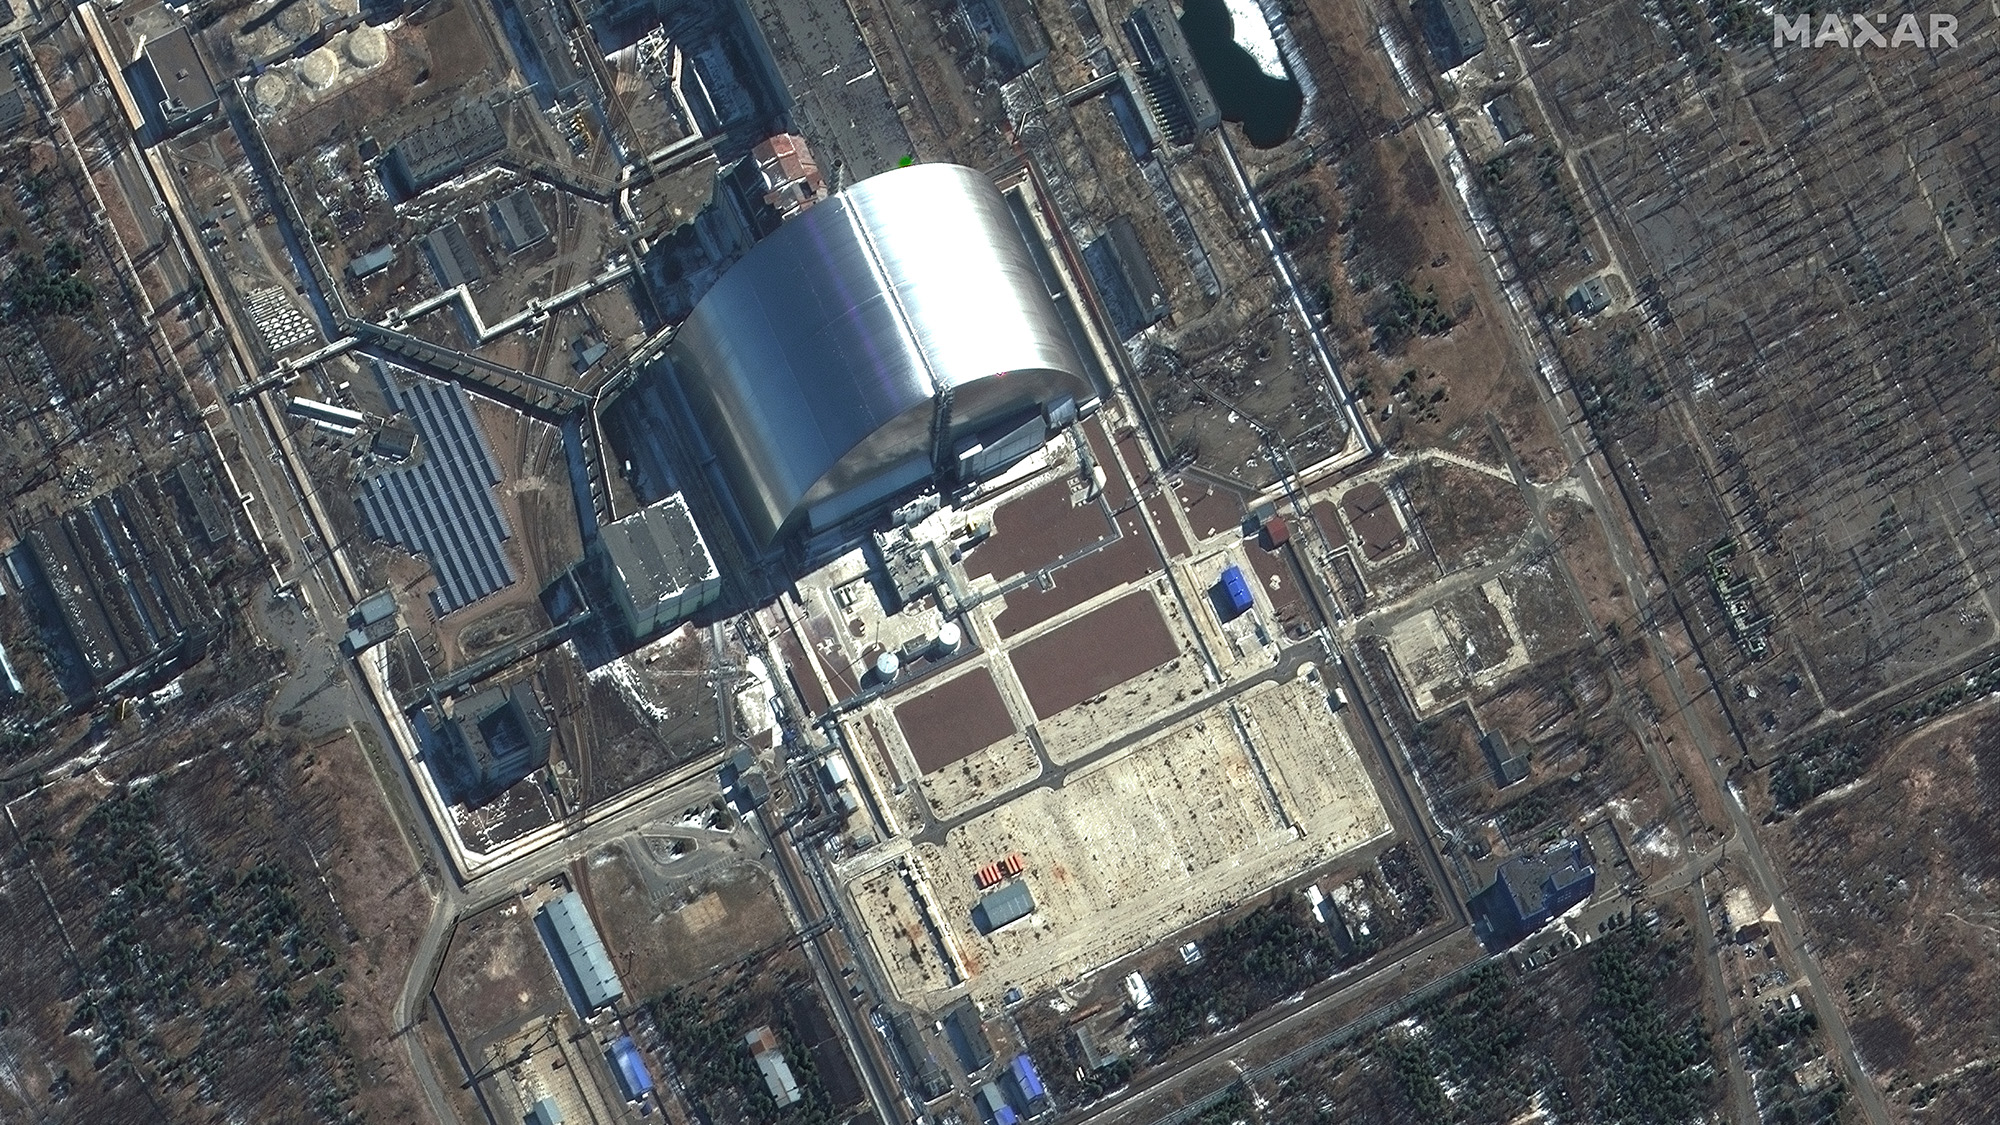 A Maxar satellite image shows the Chernobyl Nuclear Power Plant in Ukraine on March 22. 